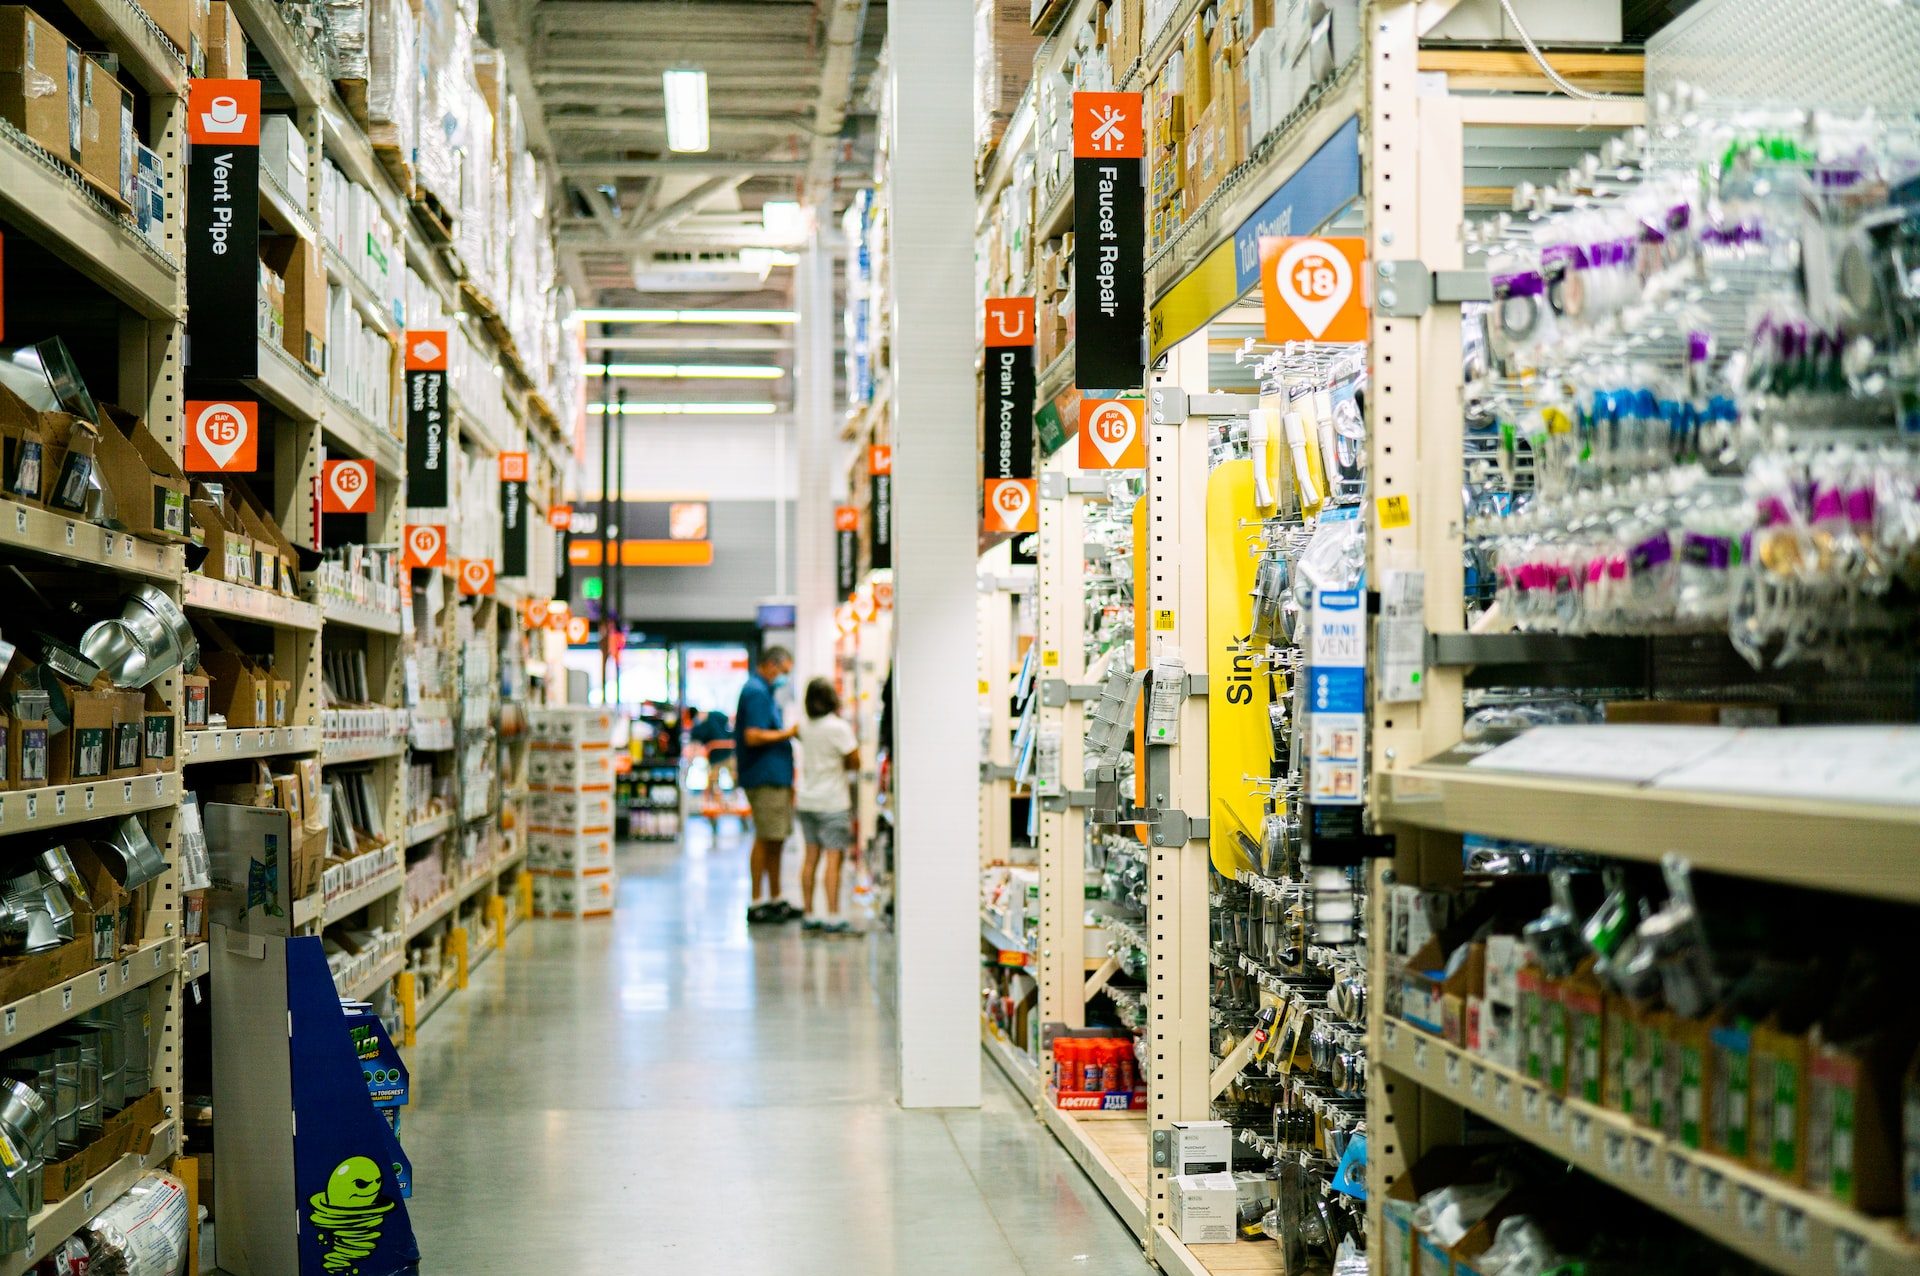 Making sense of The Home Depot data options for suppliers 